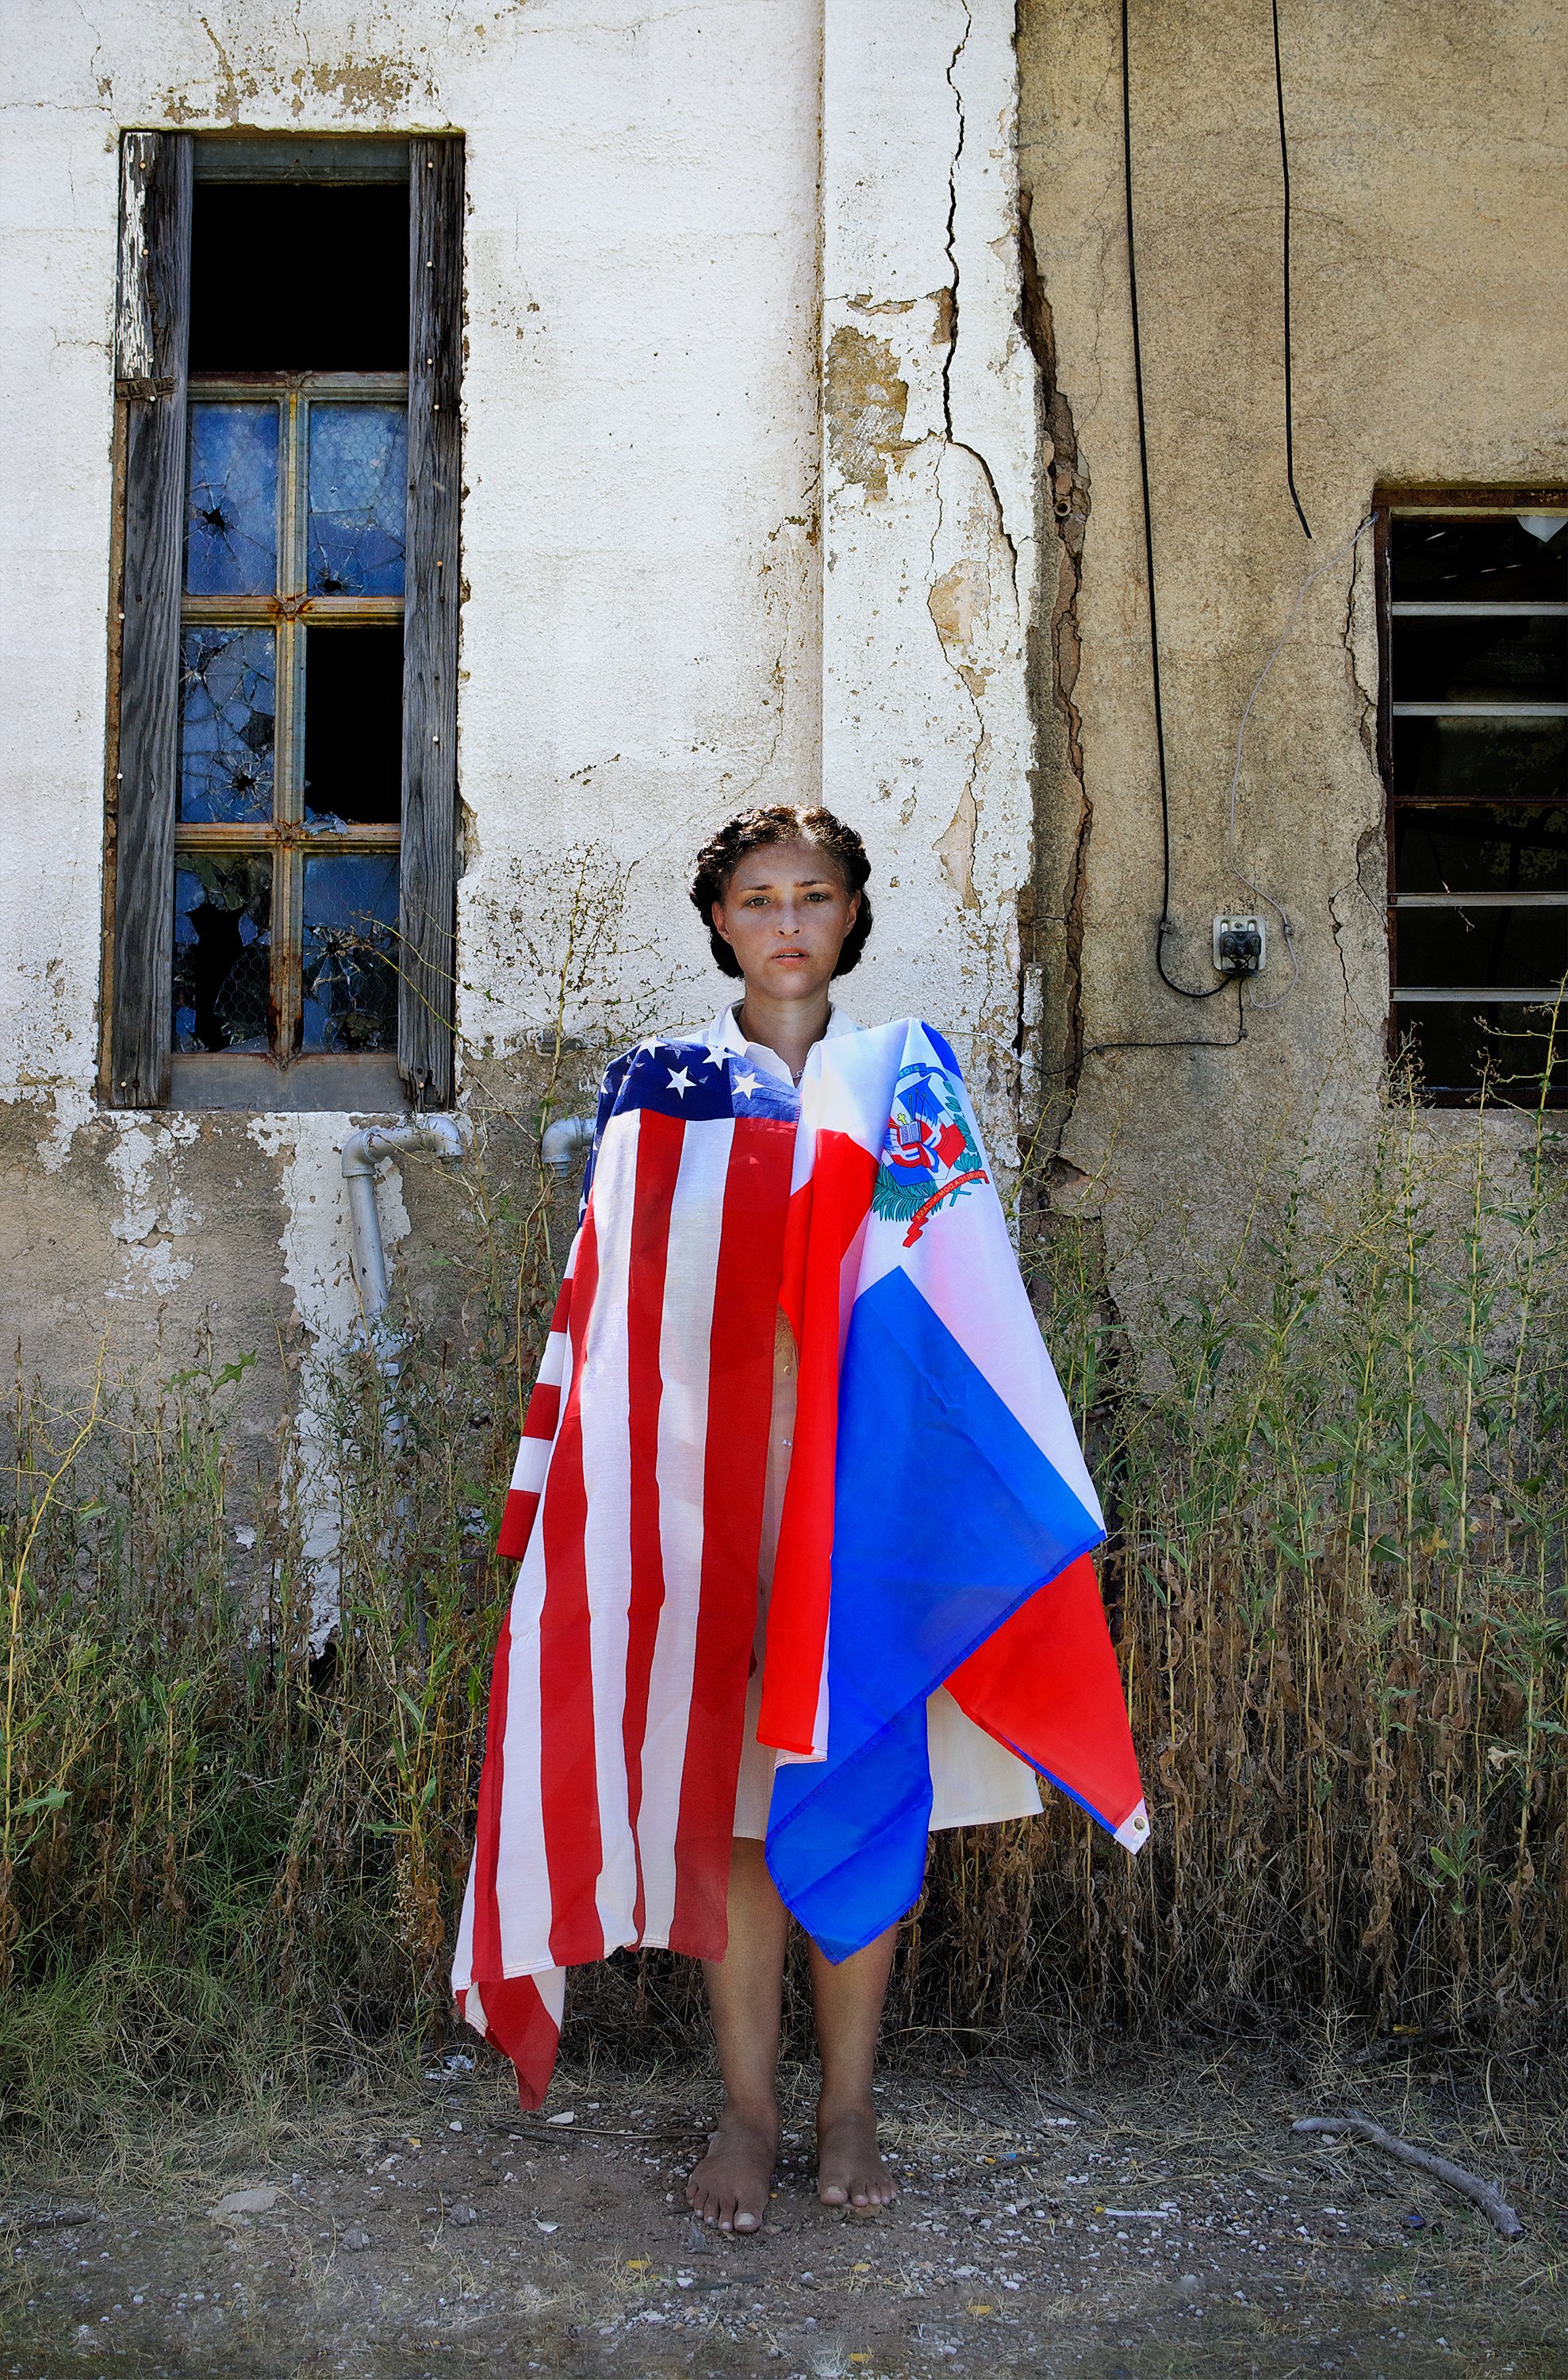 Carmen-Self portrait with the dominican and American flags.jpg